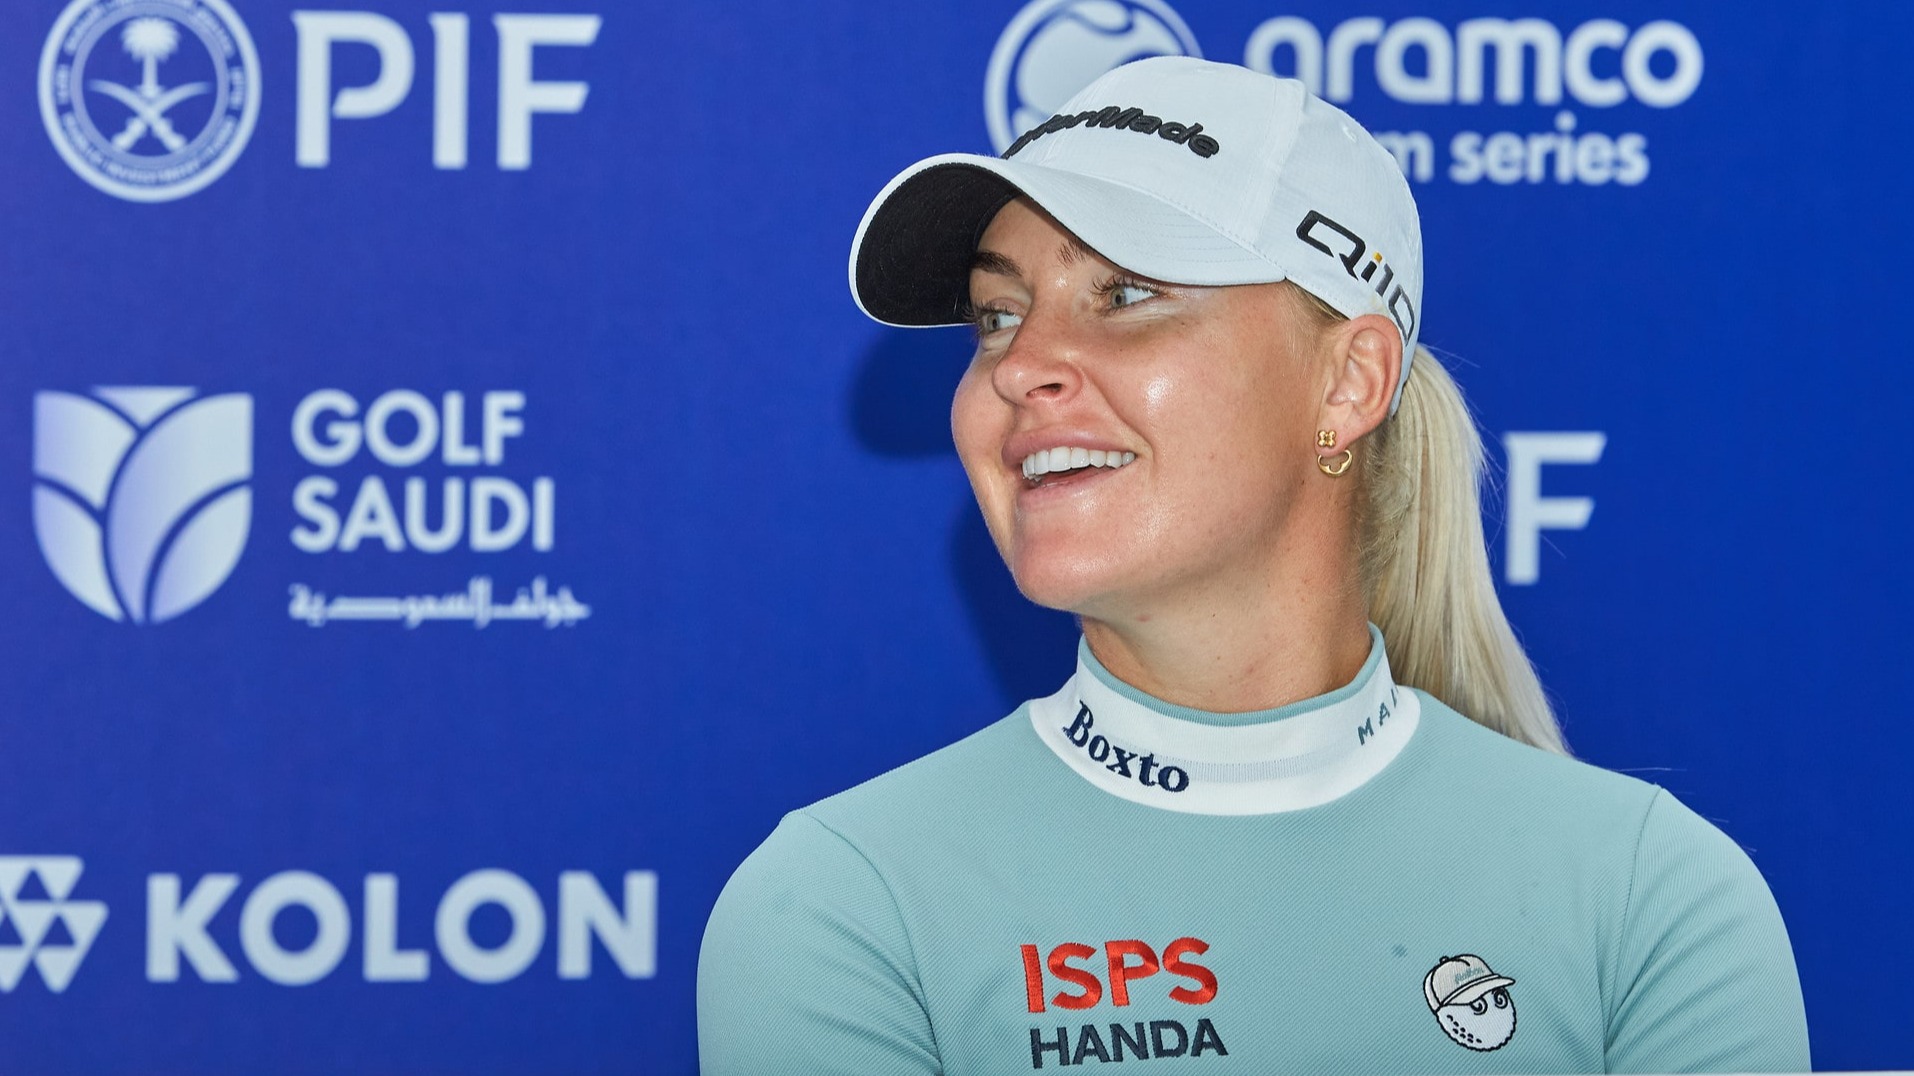 Charley Hull speaking at today's press conference